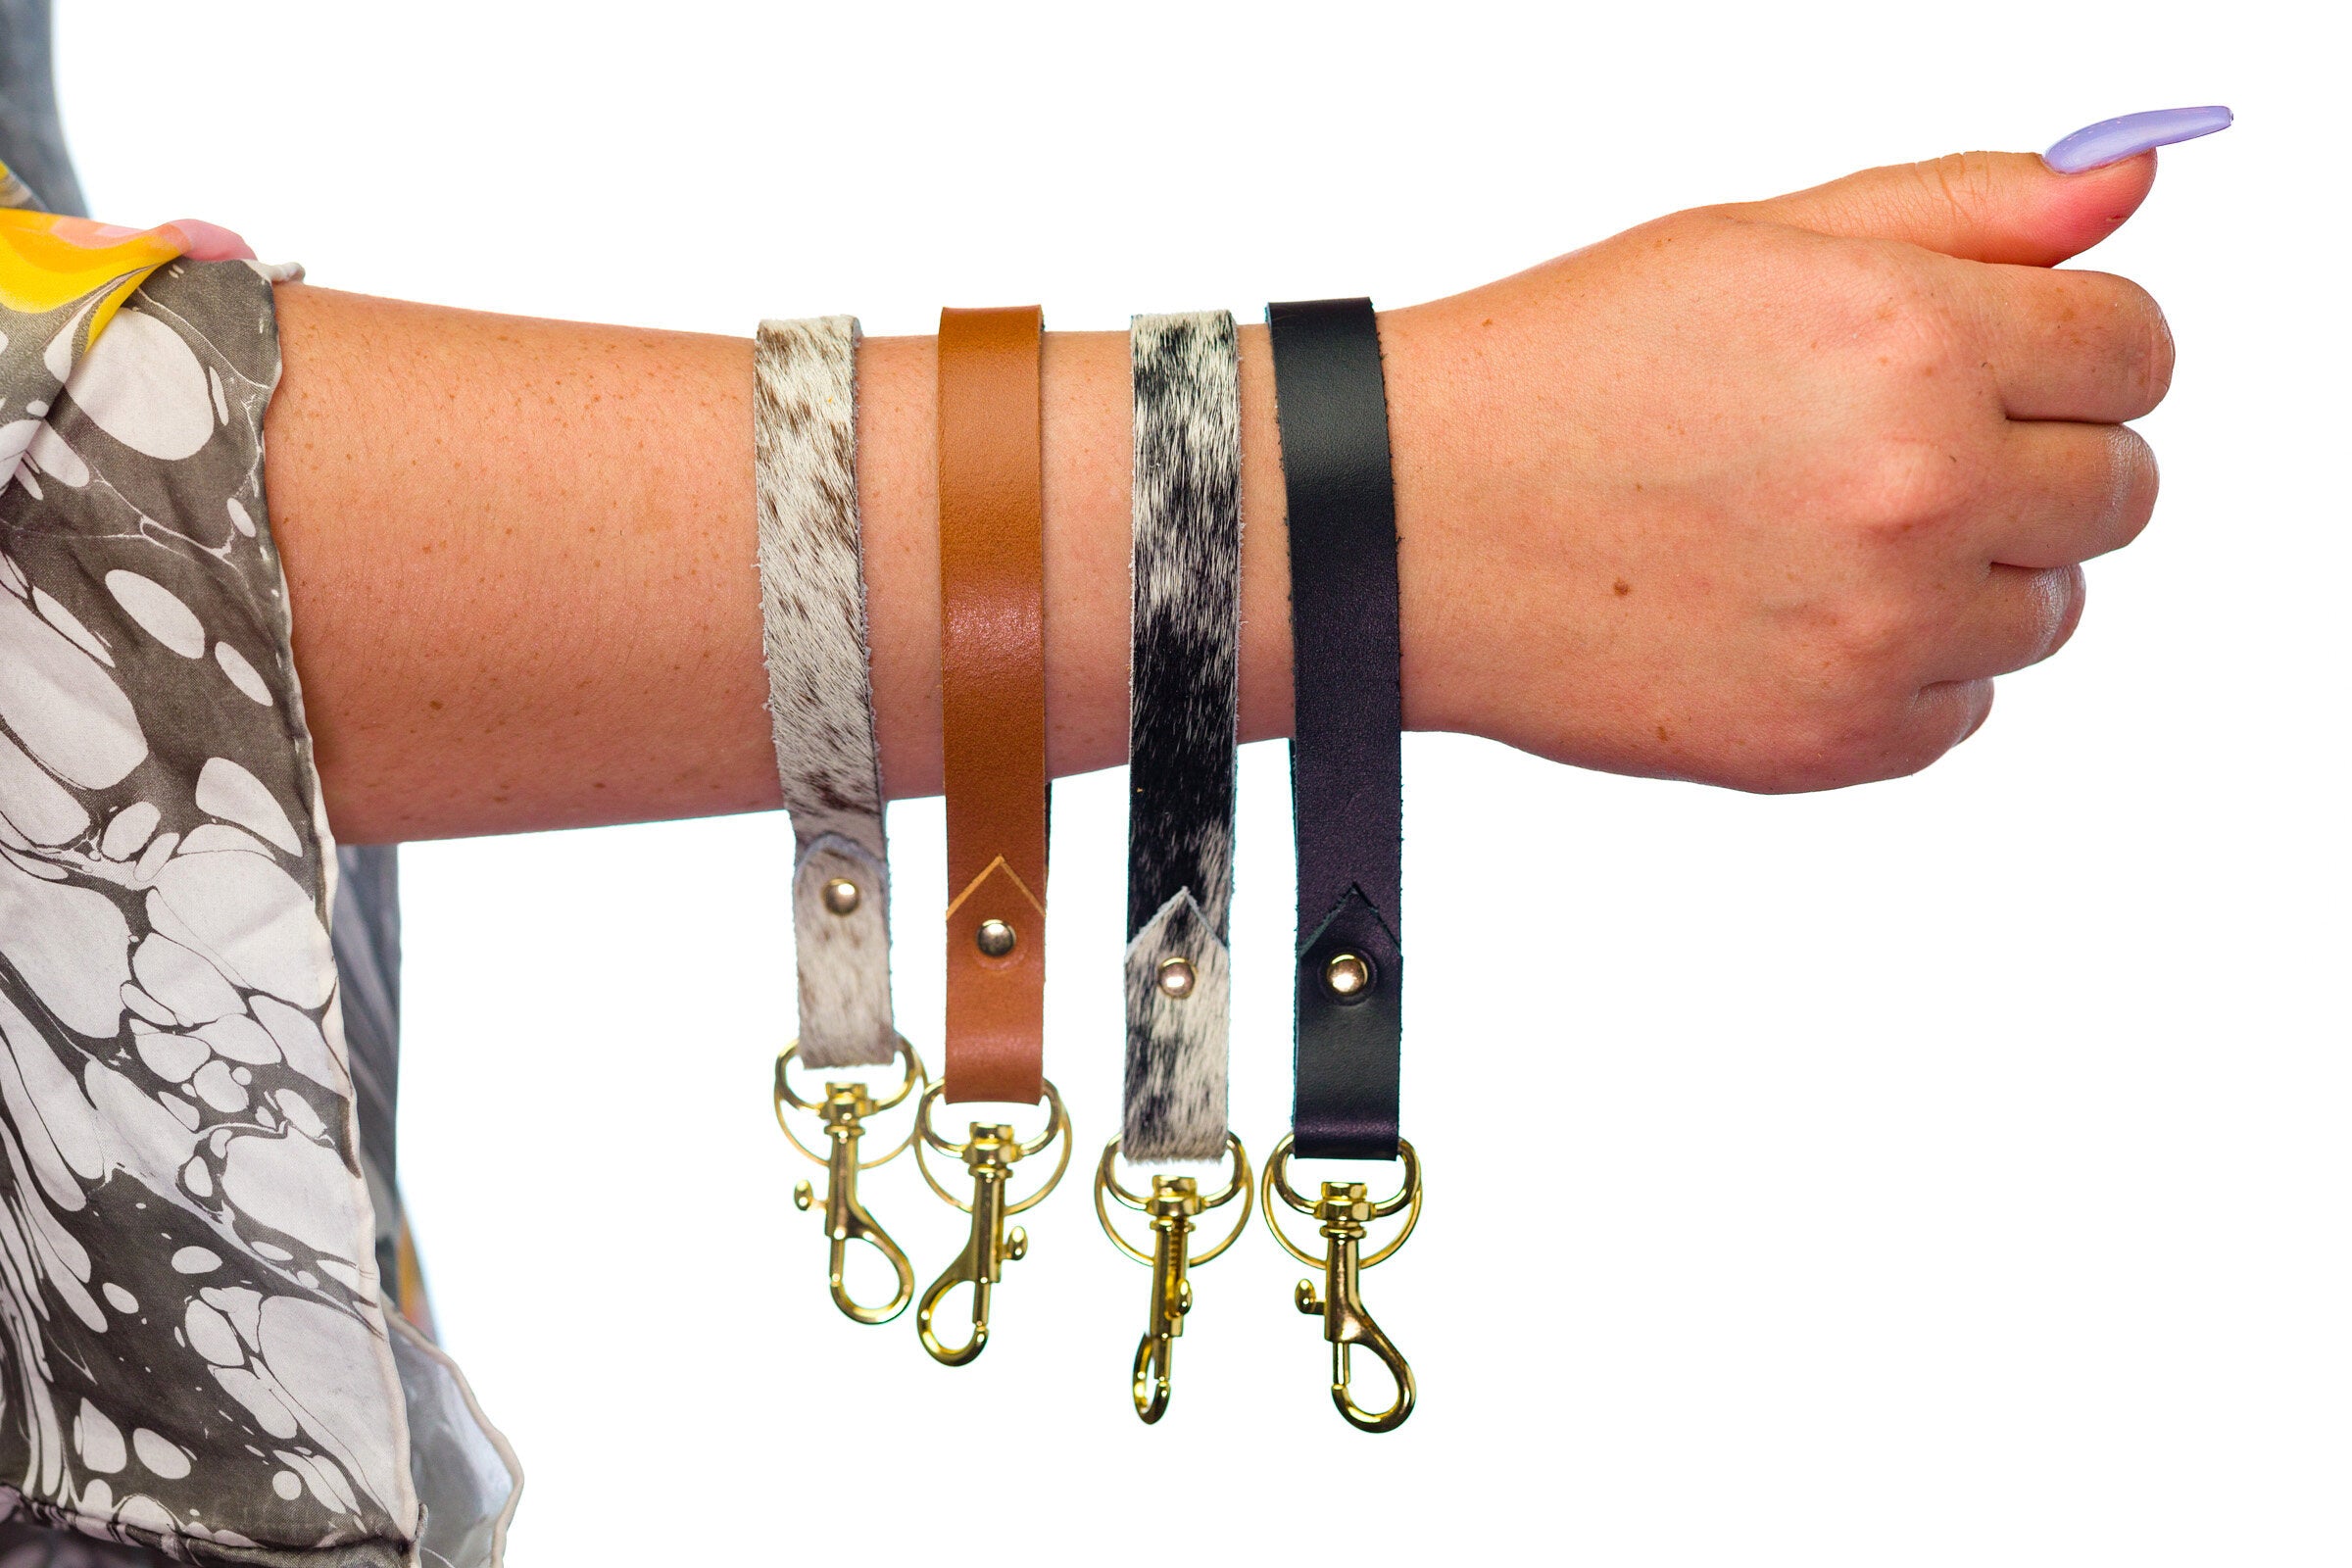 a collection of leather wrist strap loop key chains with gold hardware and varied colors.